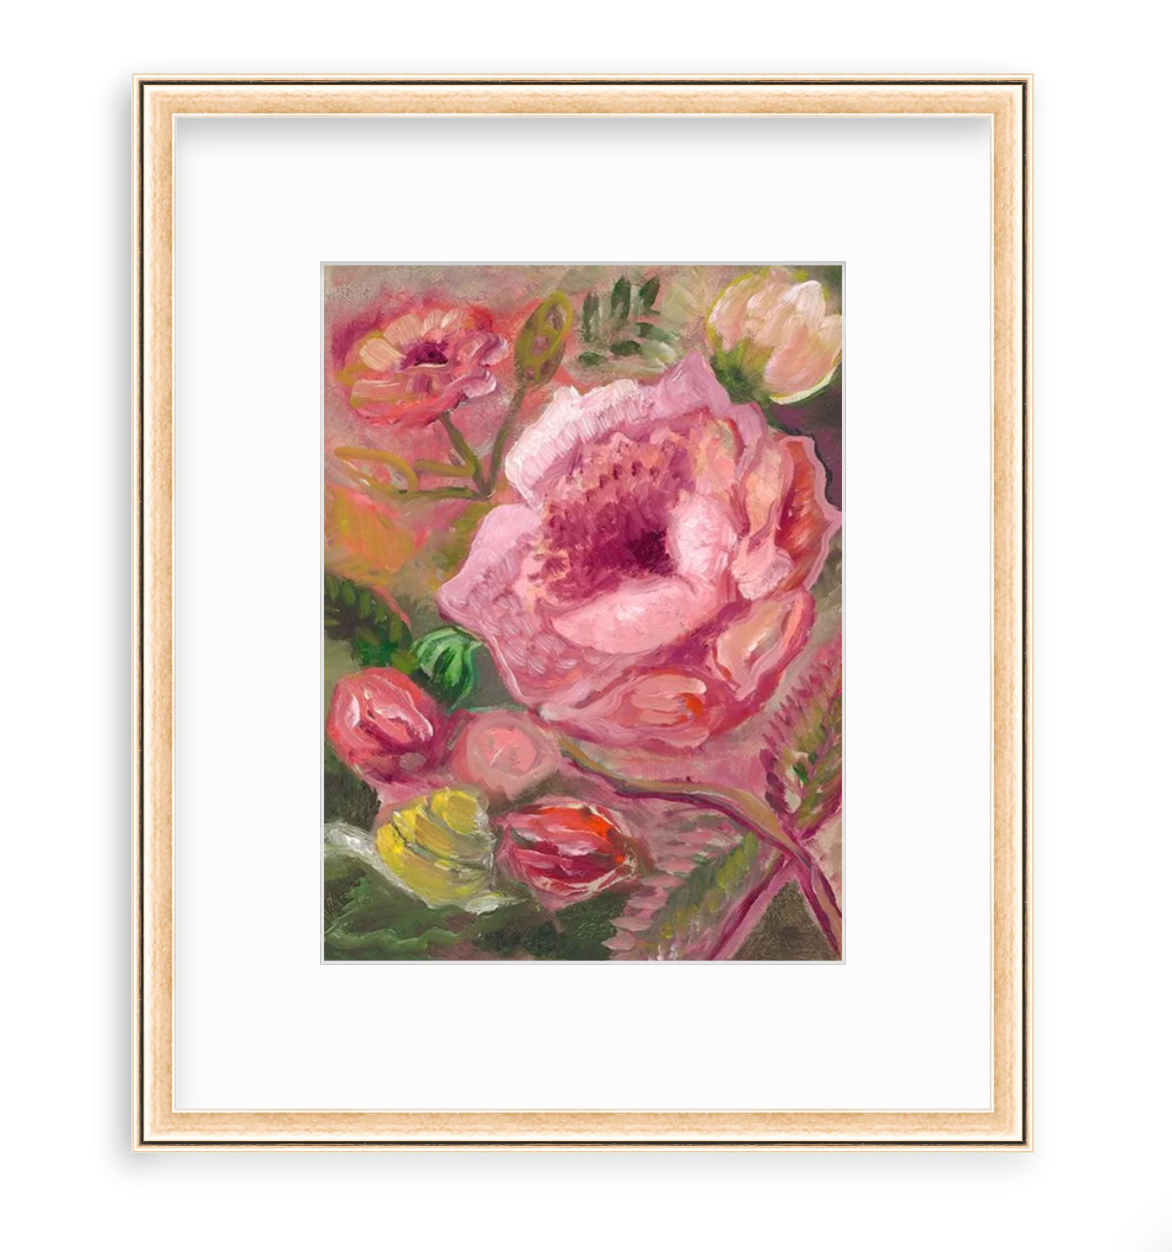 FRAMED PRINT "Rose and Snail" a Vertical Fine Art Giclee Reproduction